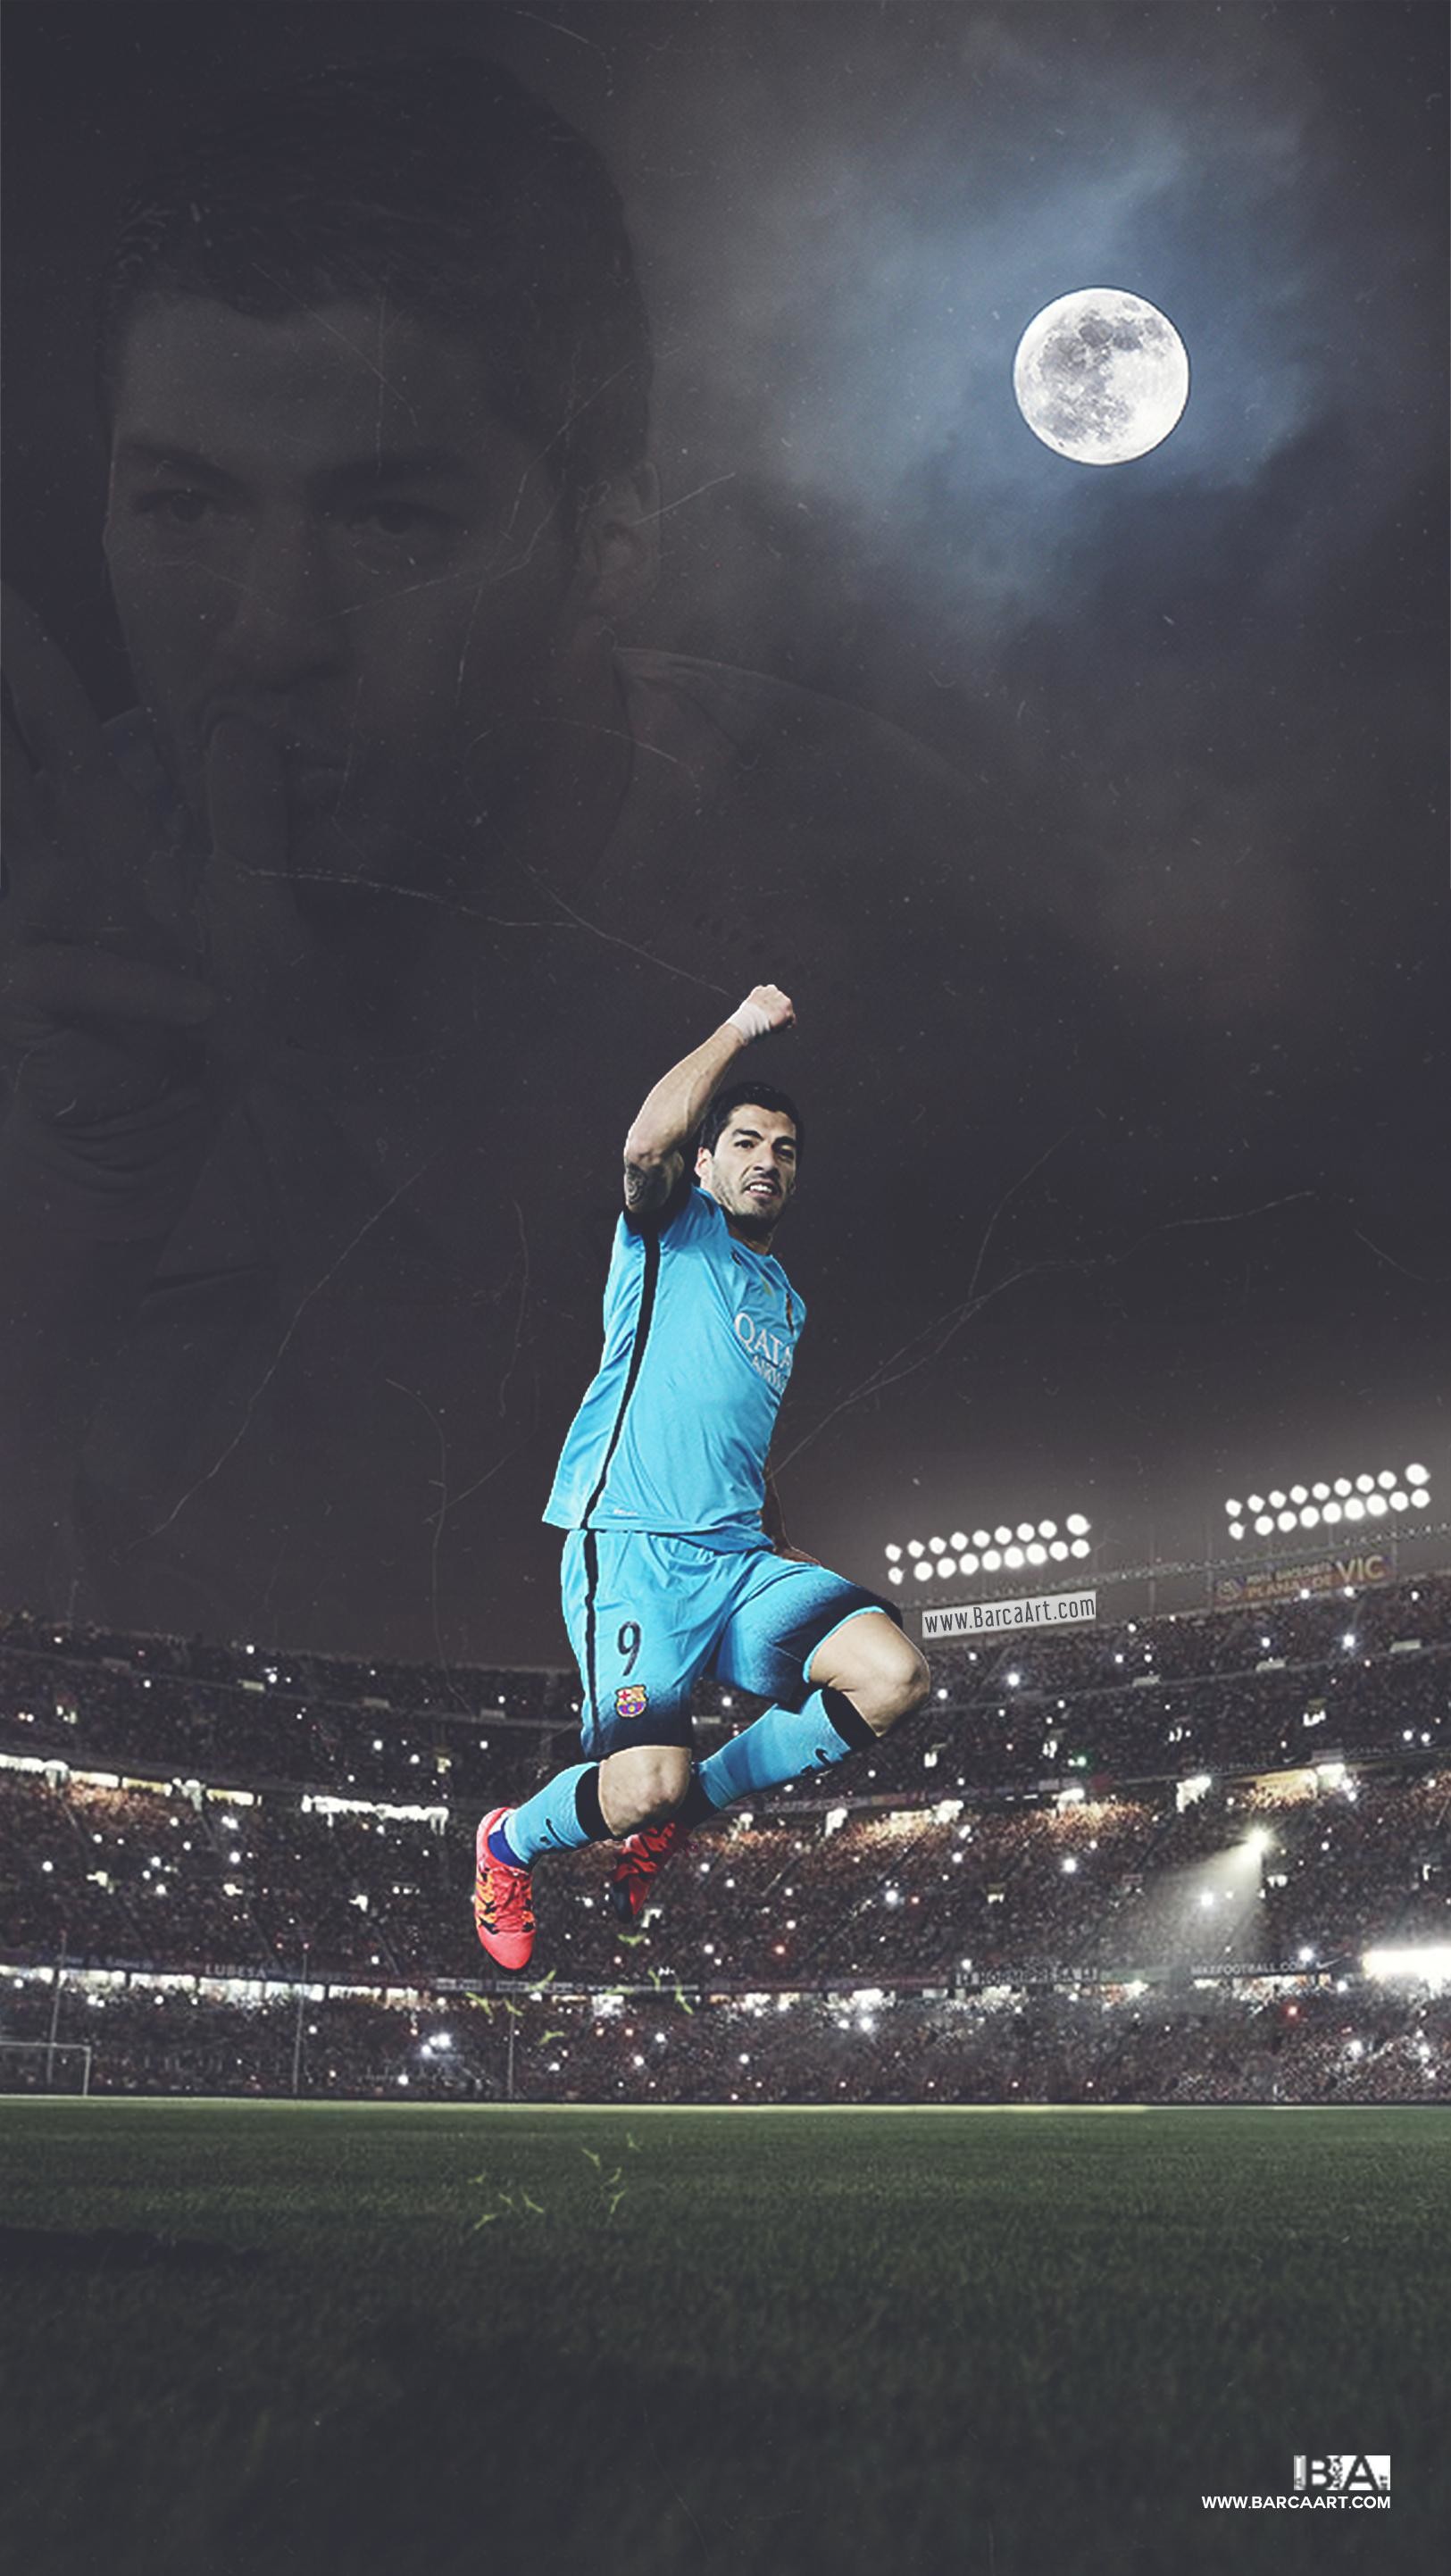 1625x2885 Luis Suarez celebrating a goal at the Camp Nou. This wallpaper was created  by superimposing 3 different pictures and blending them together to seem  like a ...